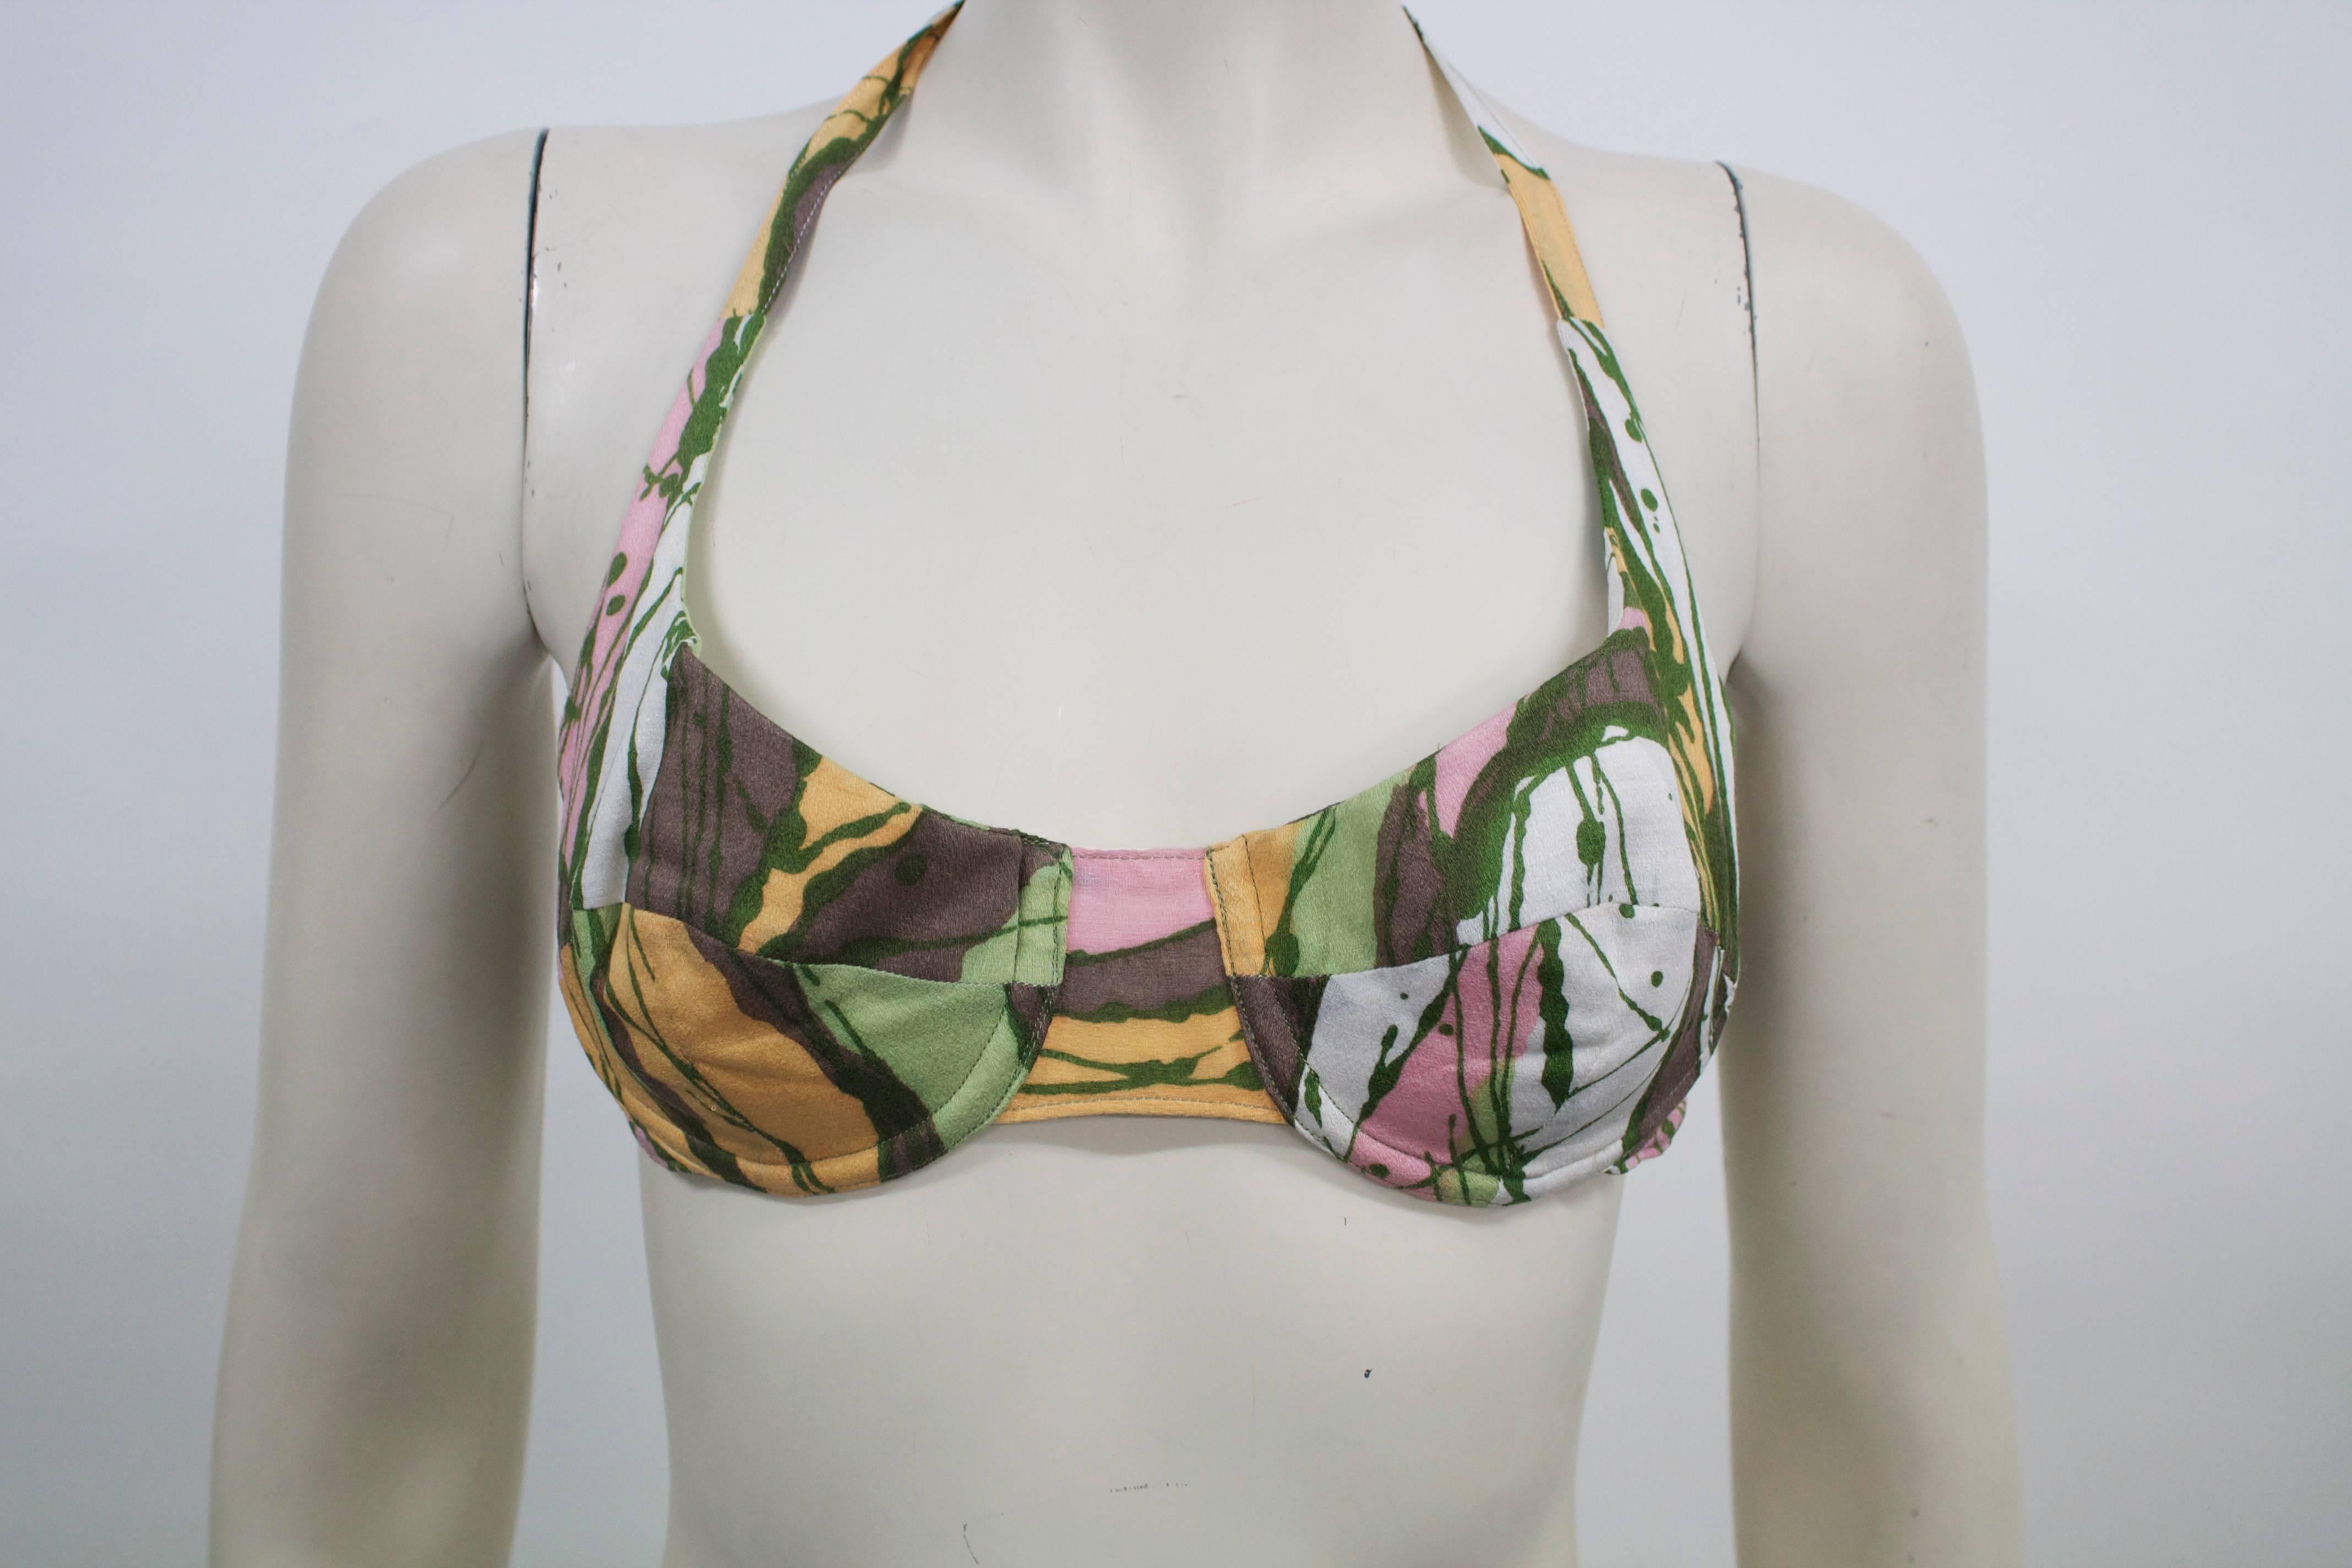 1960s COTTON BIKINI - never been worn!
Rare swimwear-  Made in Italy by Cleonice Capece. Rome, Italy.
Underwire bra cup, elasticated bottom with cute double frill and front bow detail.
Marked size 10 but small fit. 
Cotton and fully lined. 
Multi